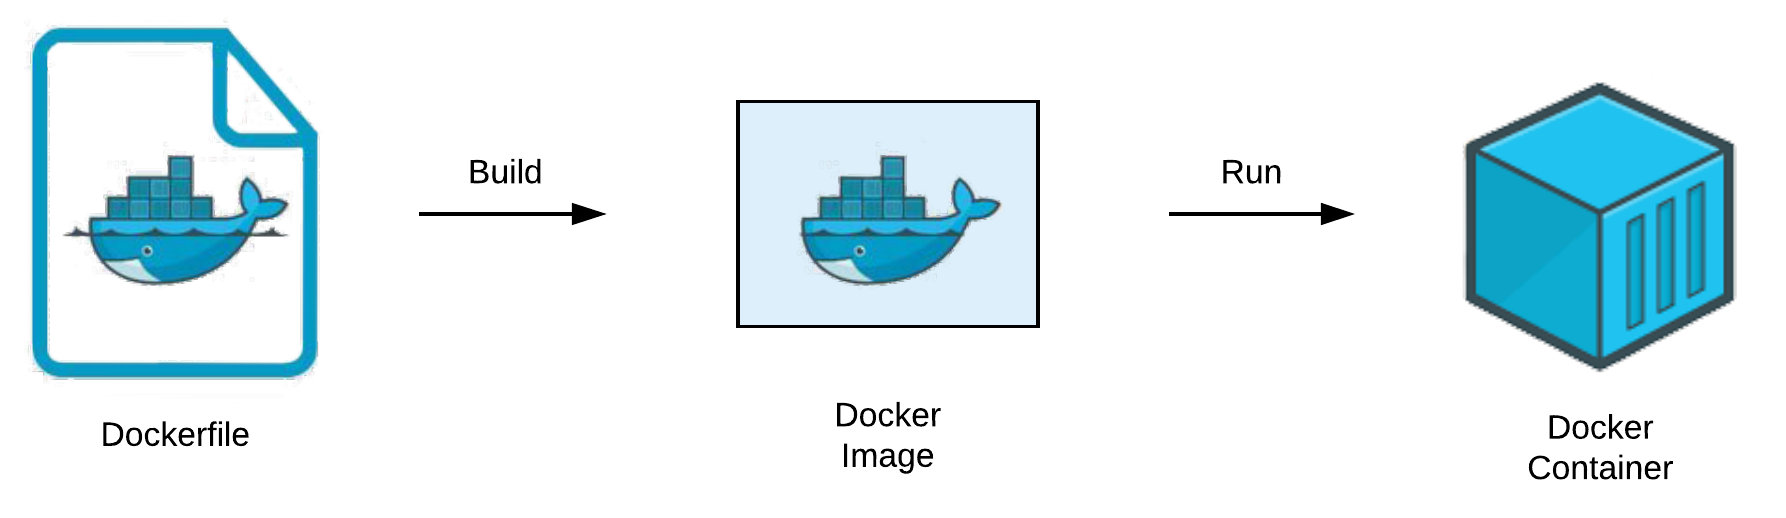 Dockerfiles, Images and Containers